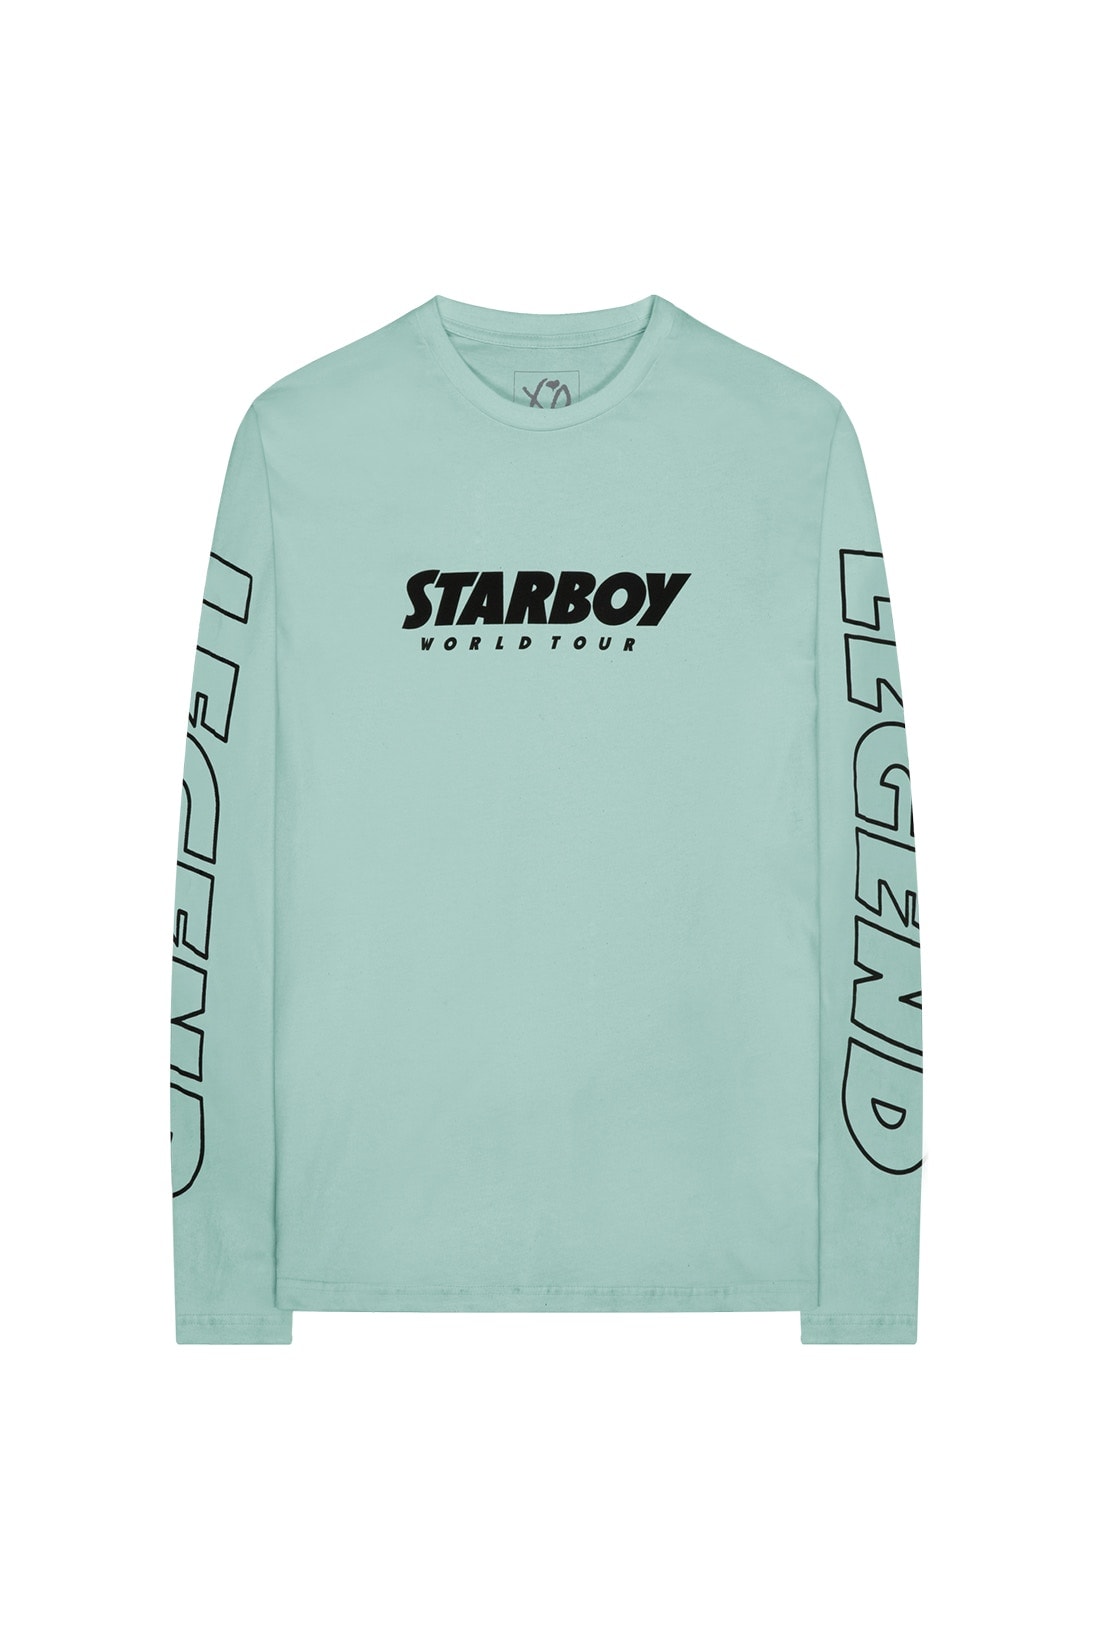 New In: The Weeknd Starboy Tour Merch